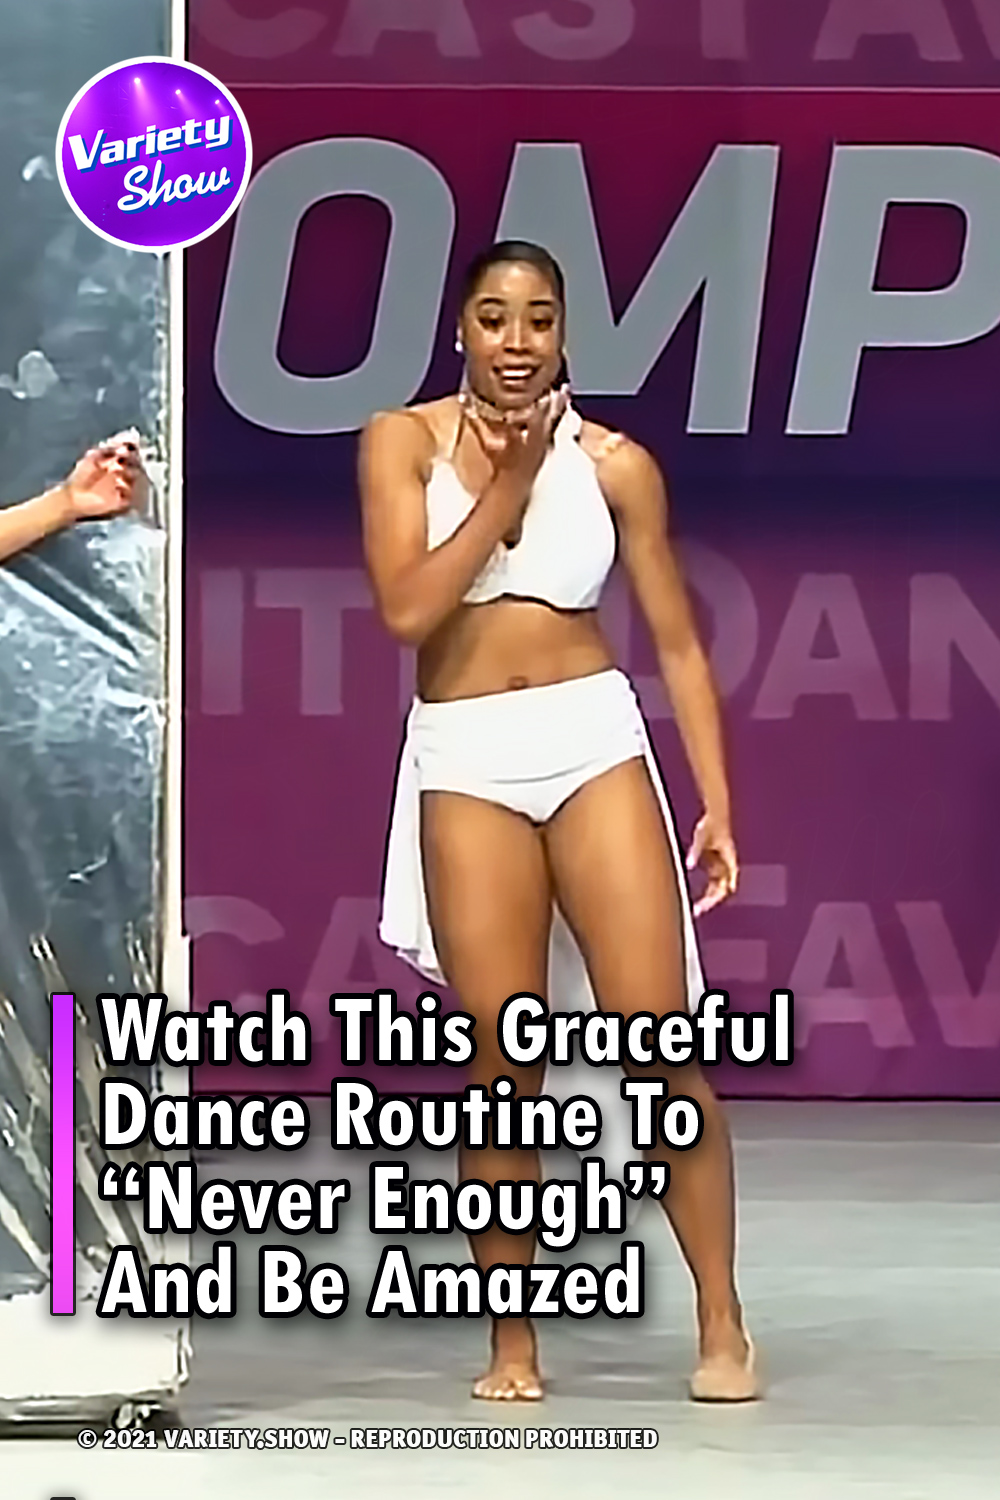 Watch This Graceful Dance Routine To “Never Enough” And Be Amazed